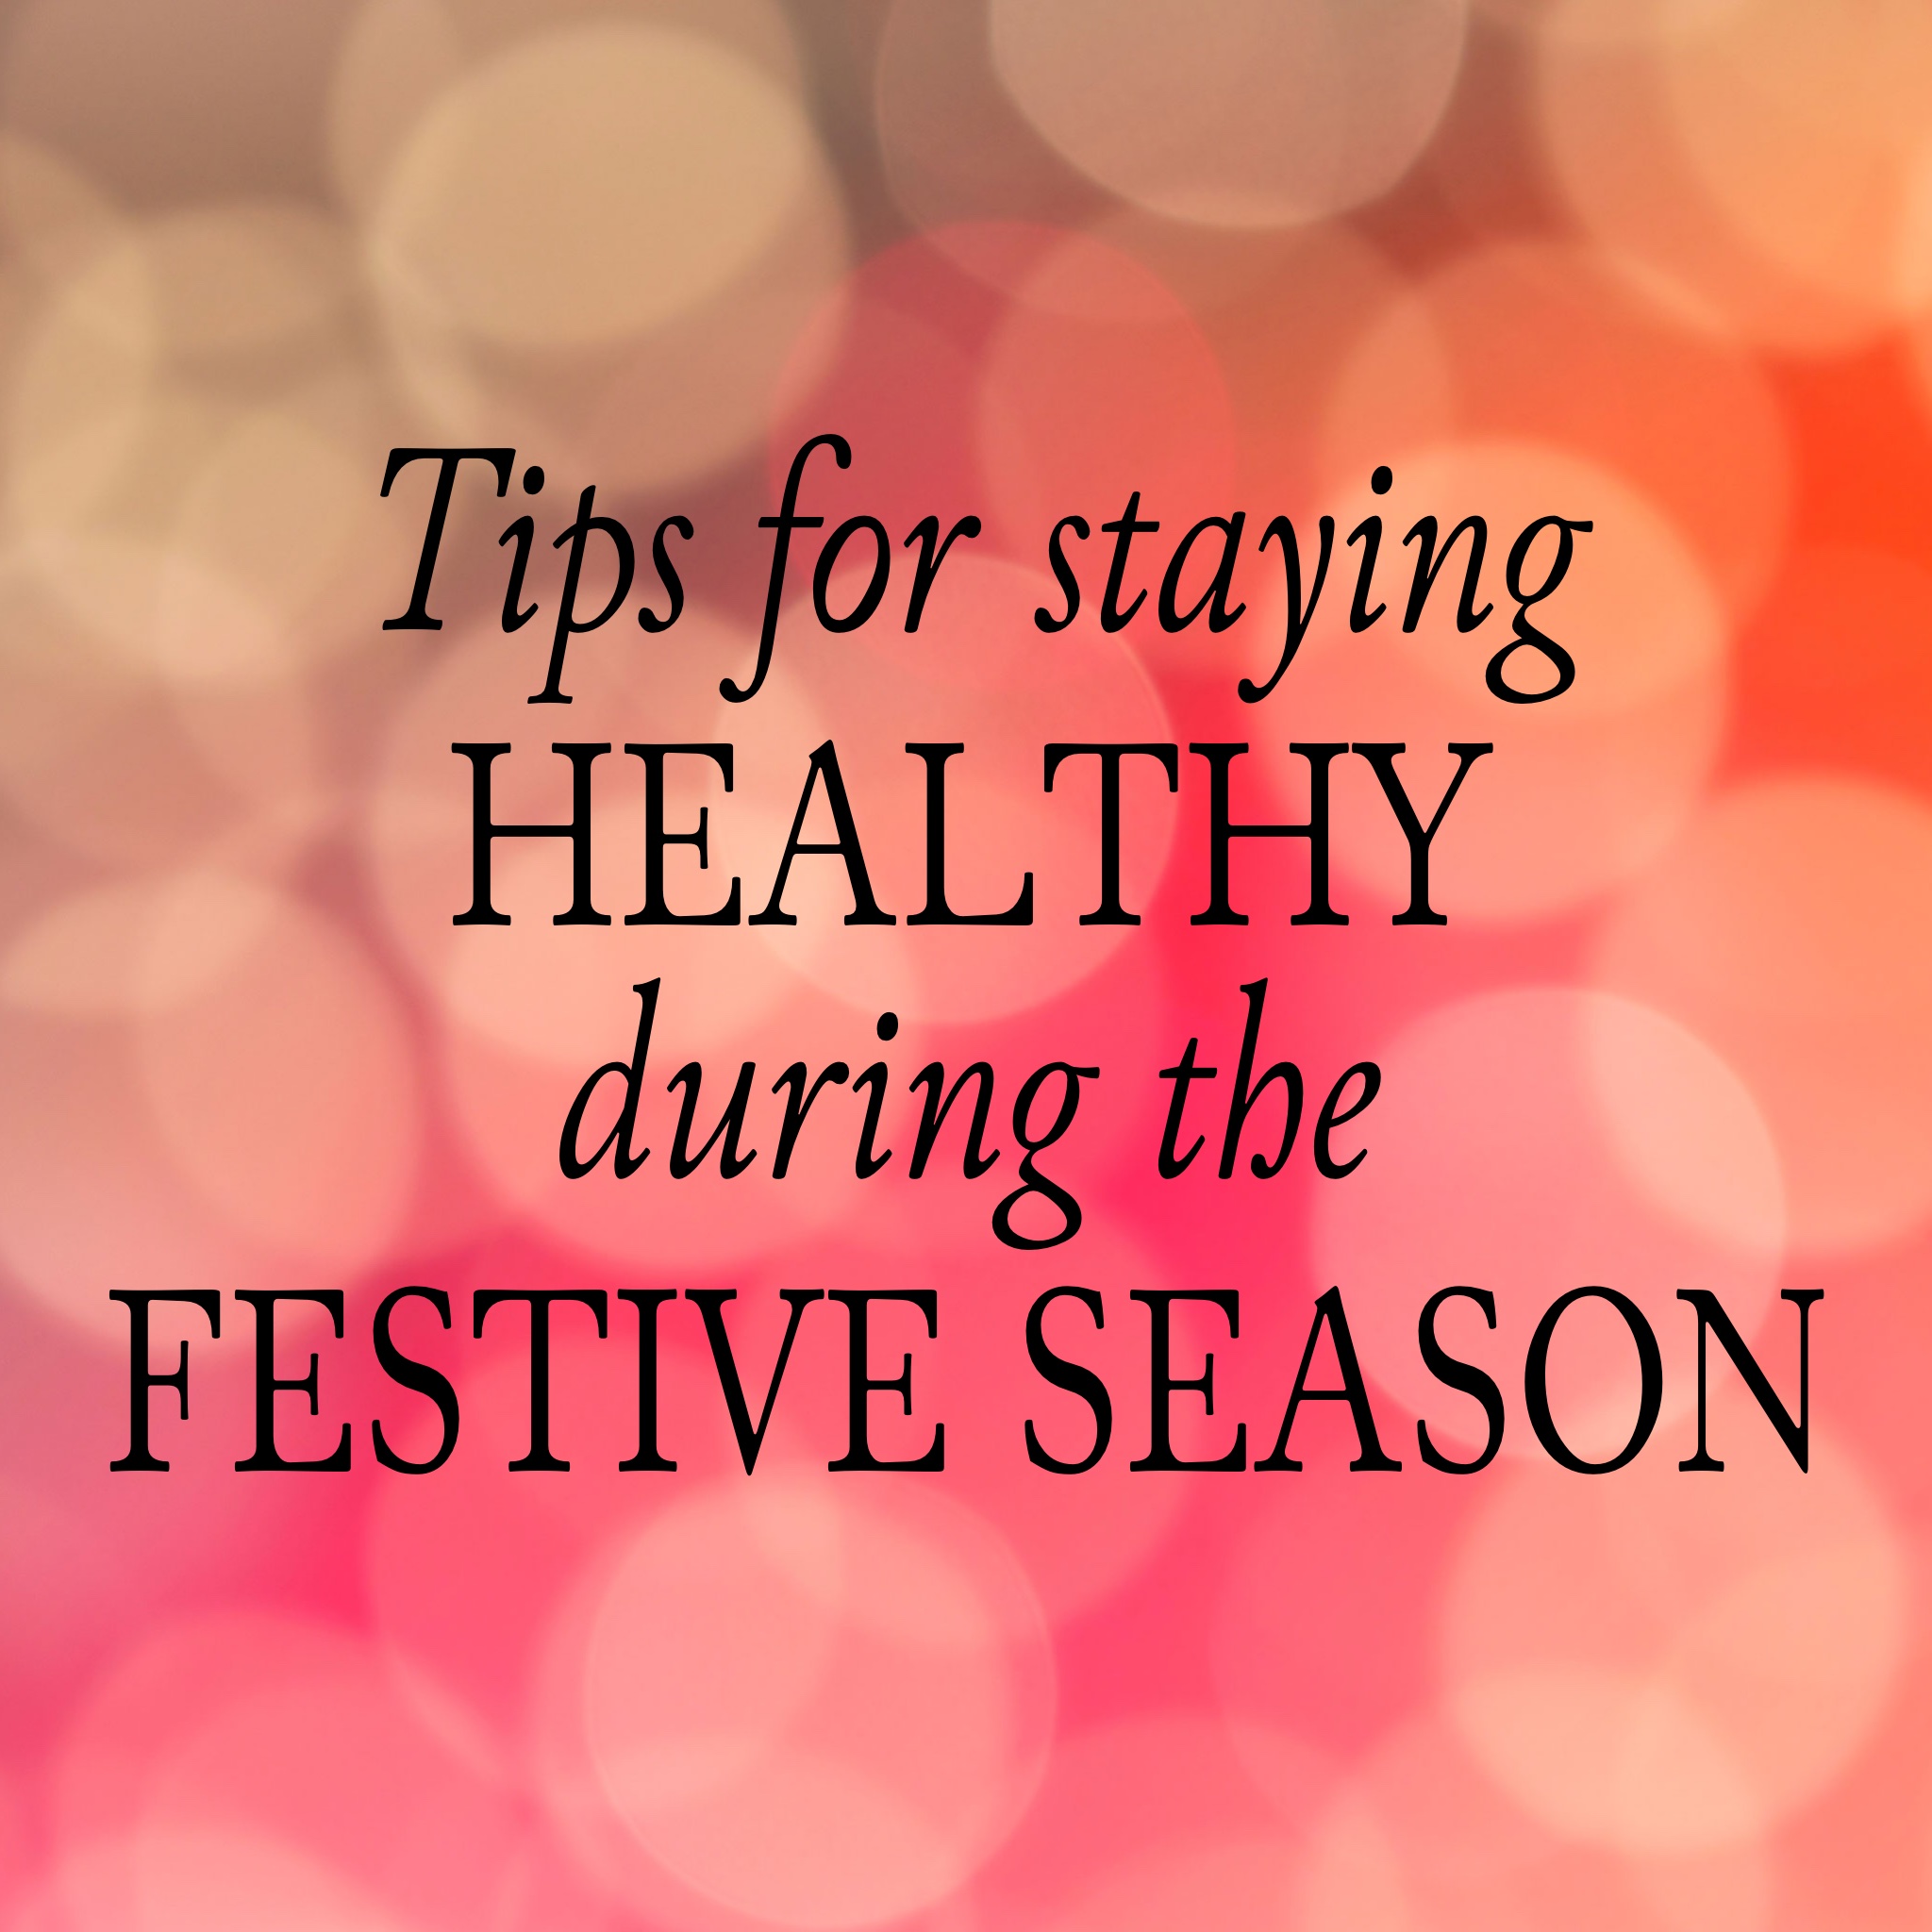 Week Tip - Tips for staying healthy during the festive season